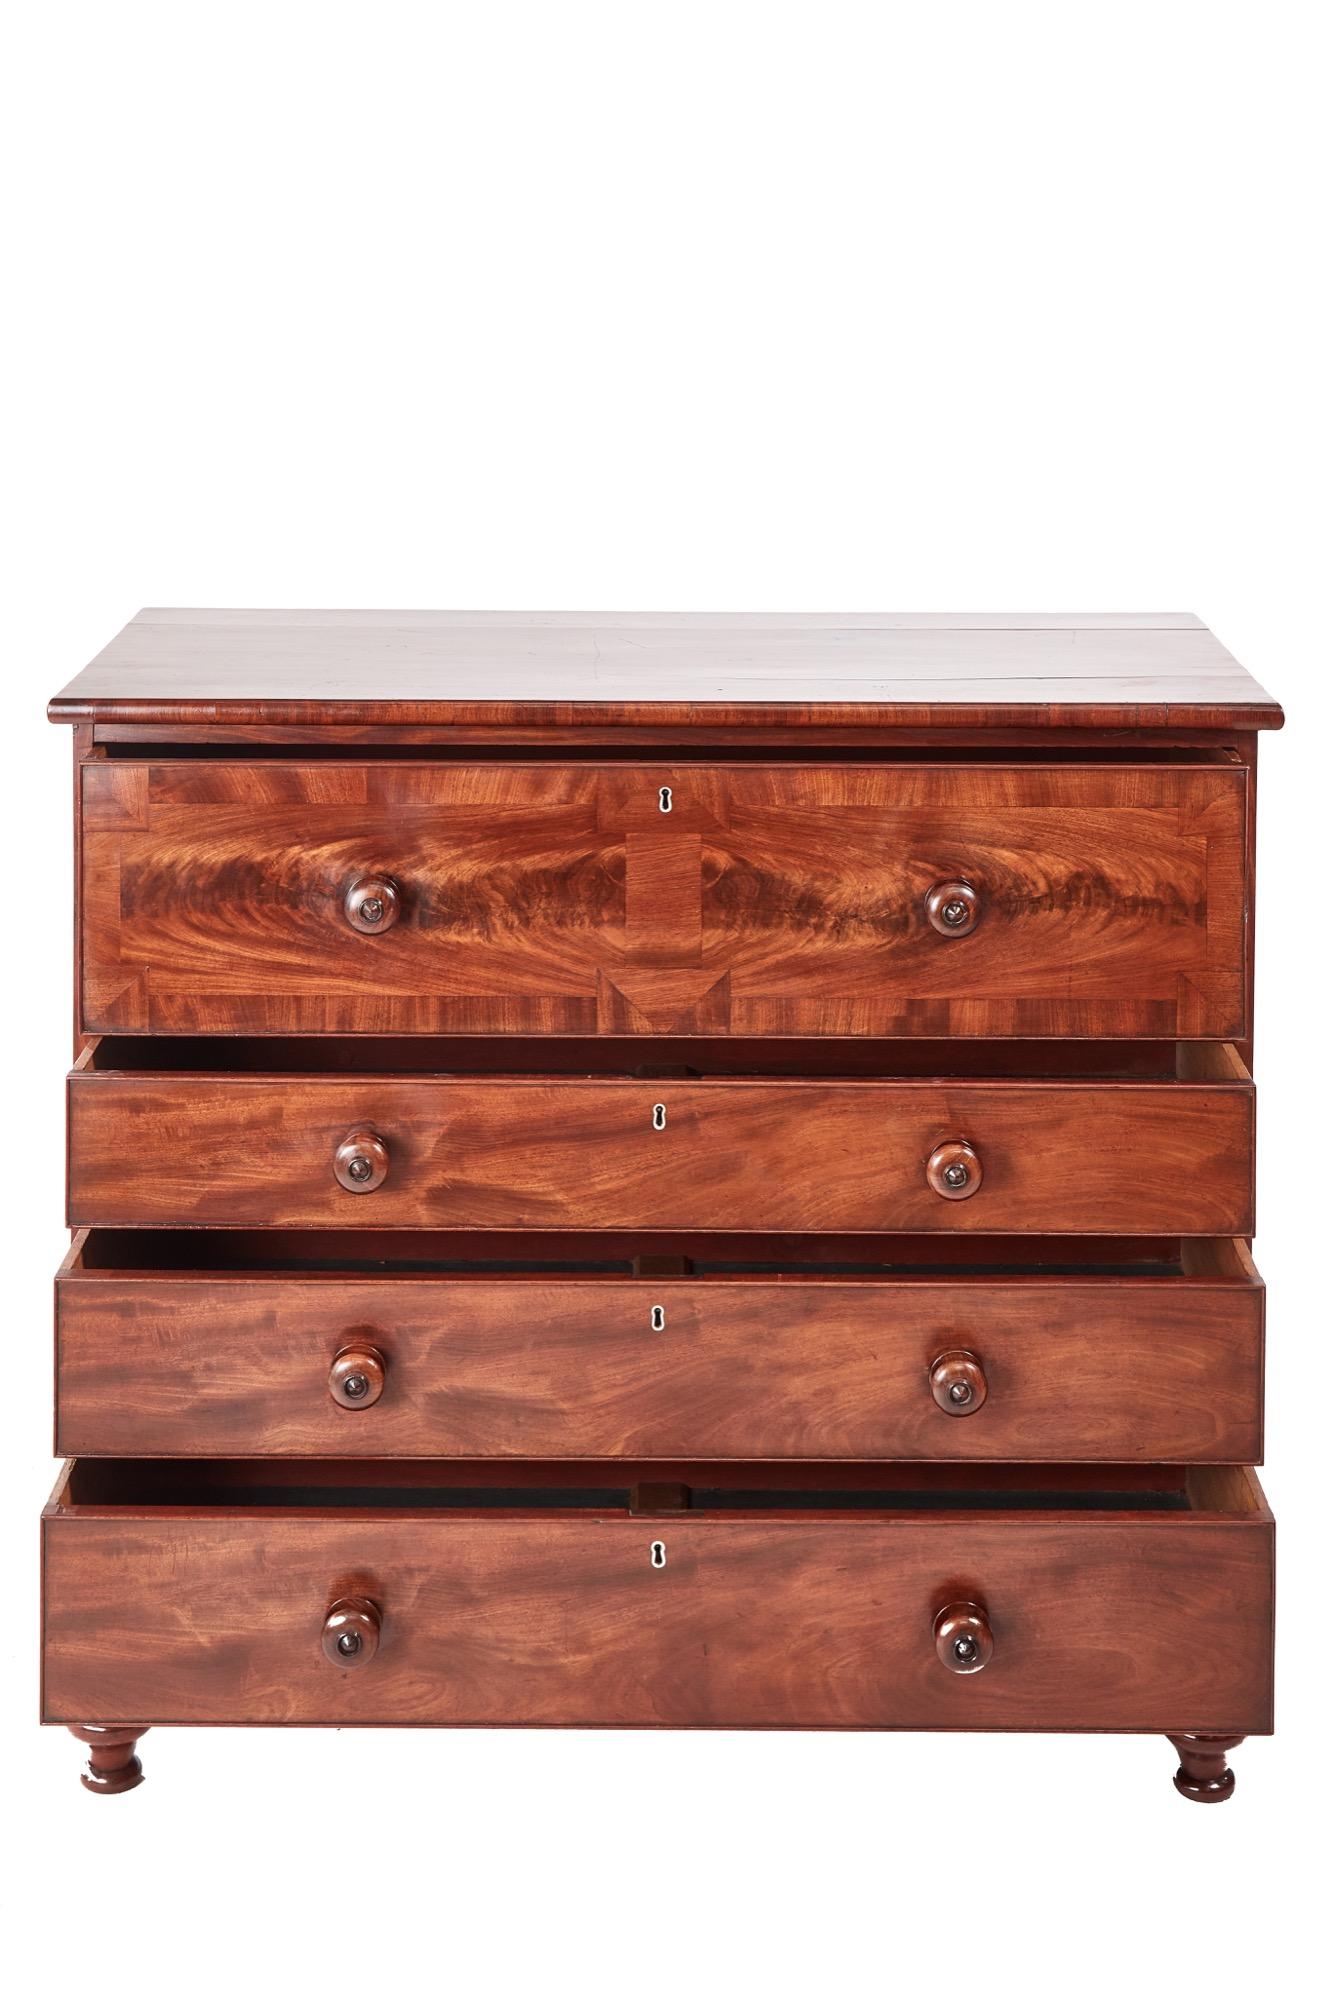 Quality Victorian mahogany chest of drawers, with a lovely quality mahogany top having four long drawers in figured mahogany crossbanded in mahogany, original turned mahogany knobs, standing on original turned feet
Lovely color and